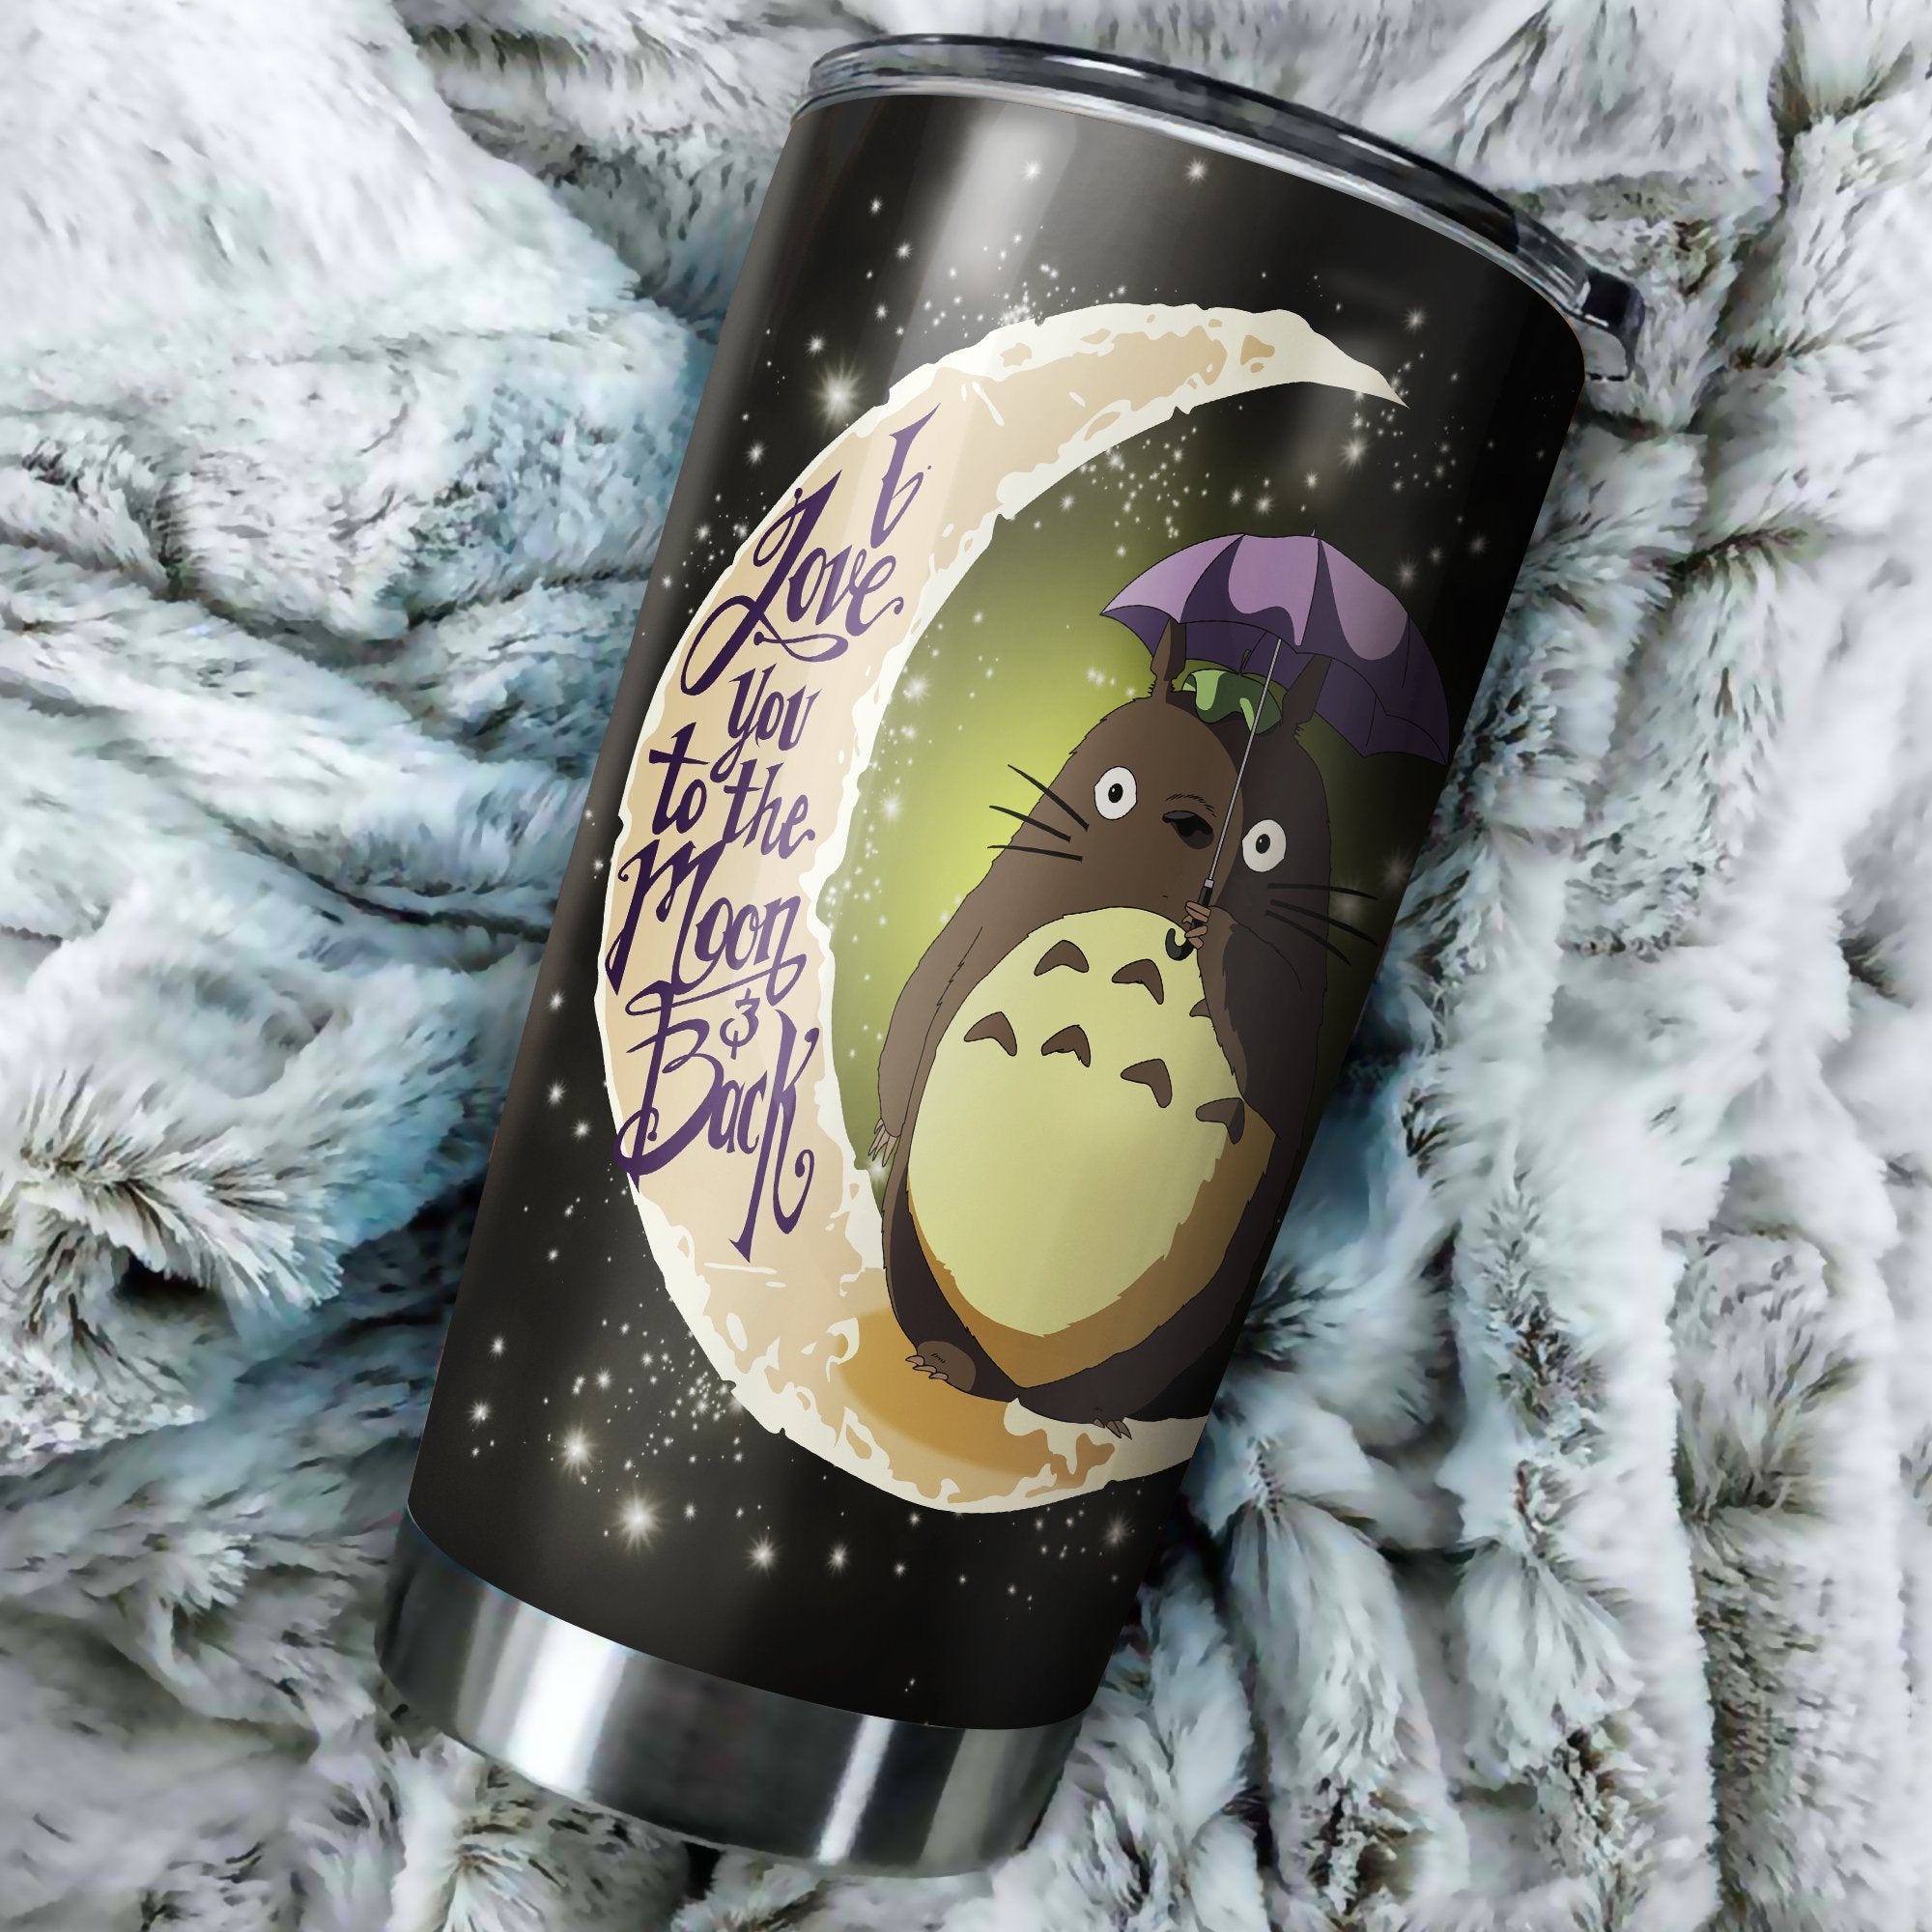 Totoro Love Moon And Back Tumbler Perfect Birthday Best Gift Stainless Traveling Mugs 2021